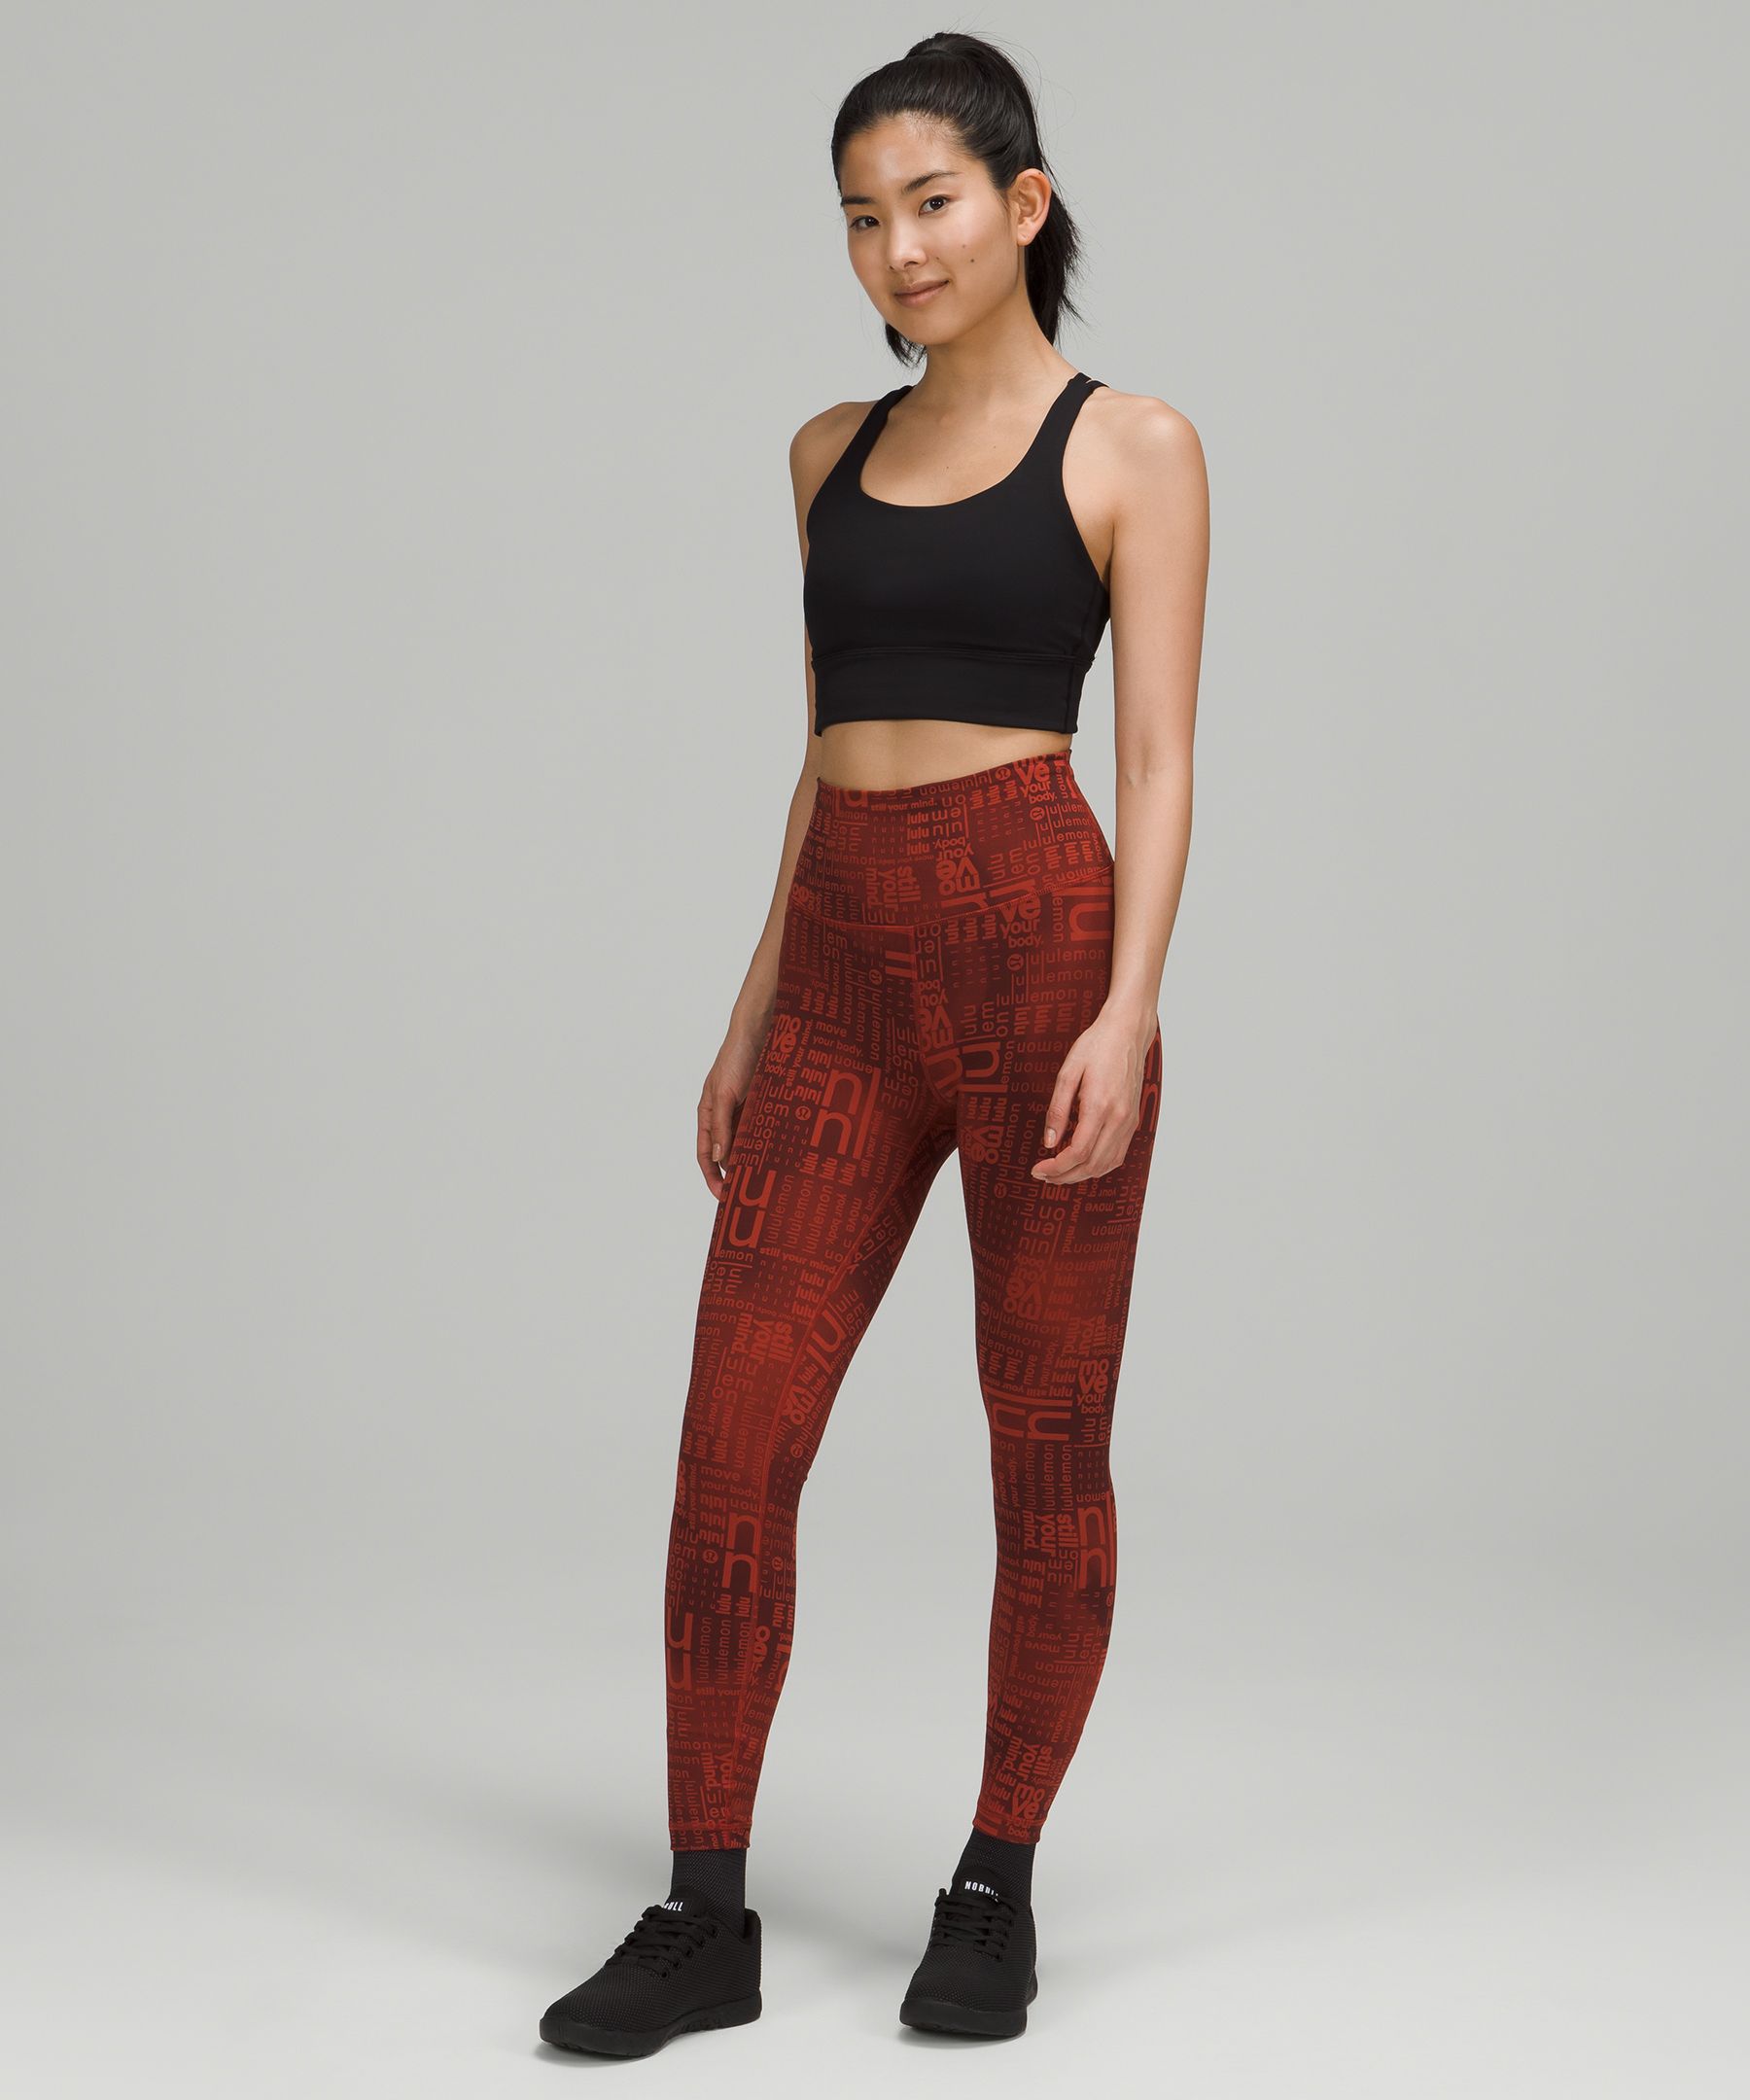 Invigorate Asia Fit Lululemon 24 size S red leggings with pockets